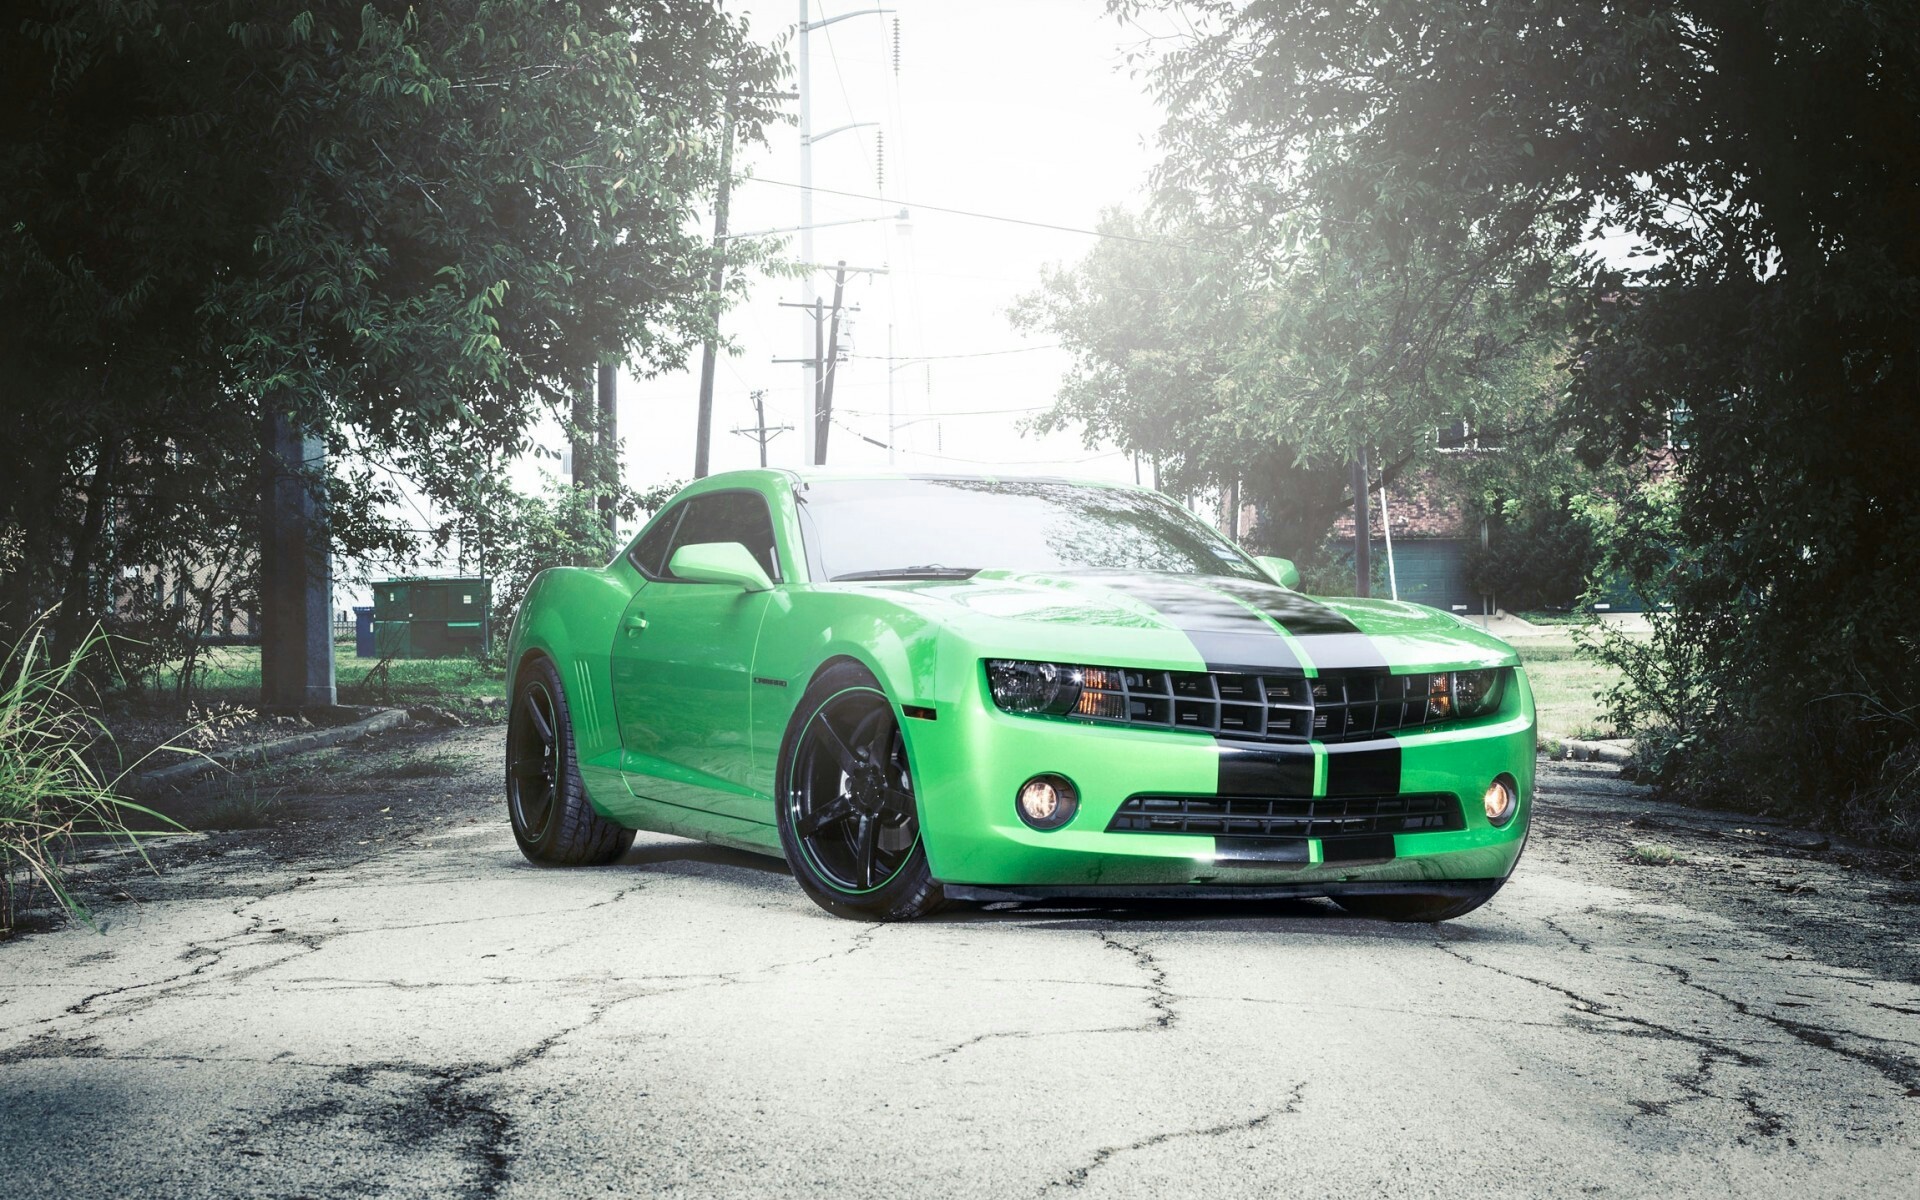 General 1920x1200 car Chevrolet Camaro Chevrolet green cars vehicle muscle cars American cars racing stripes